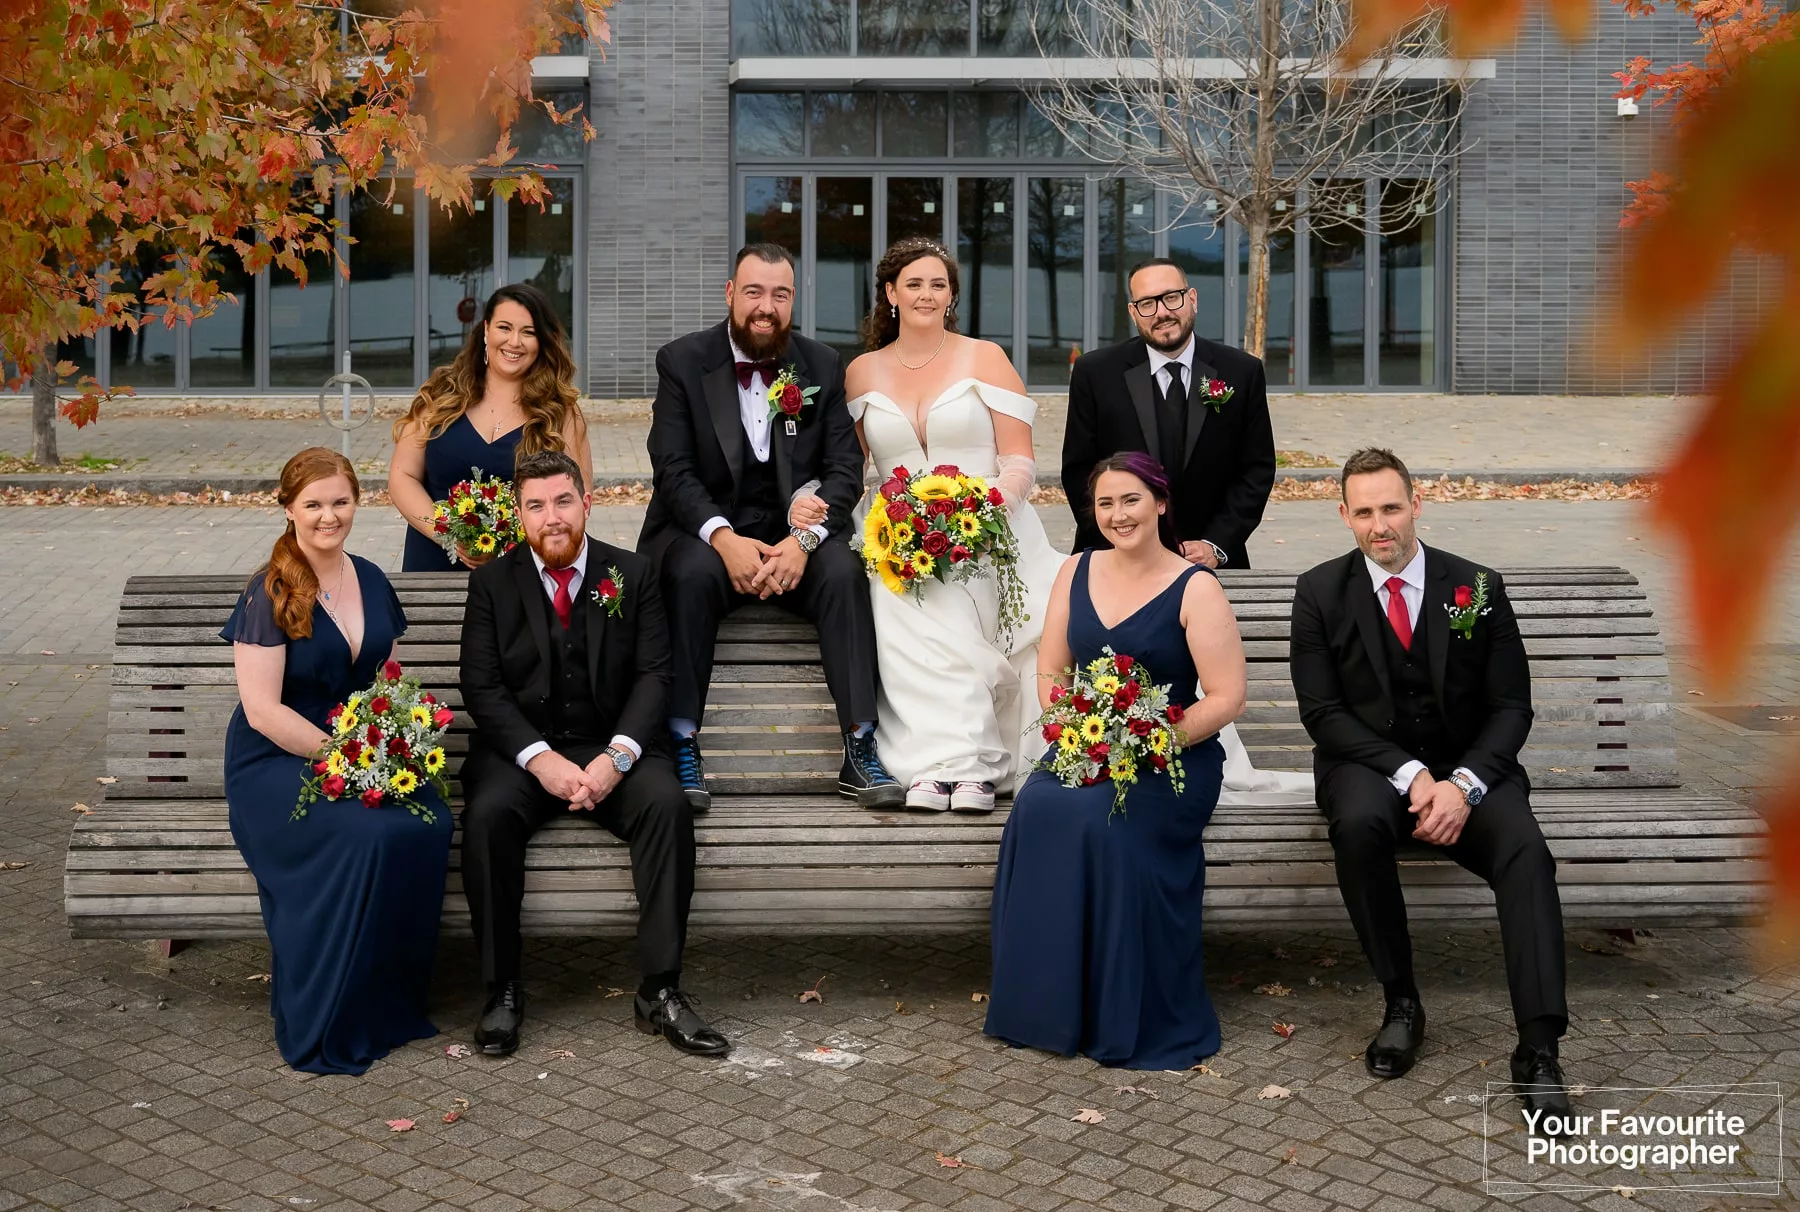 Bride and groom with their bridesmaids and groomsmen sit on a bench in downtown Toronto, near Sherbourne Common, on the Water's Edge Promenade